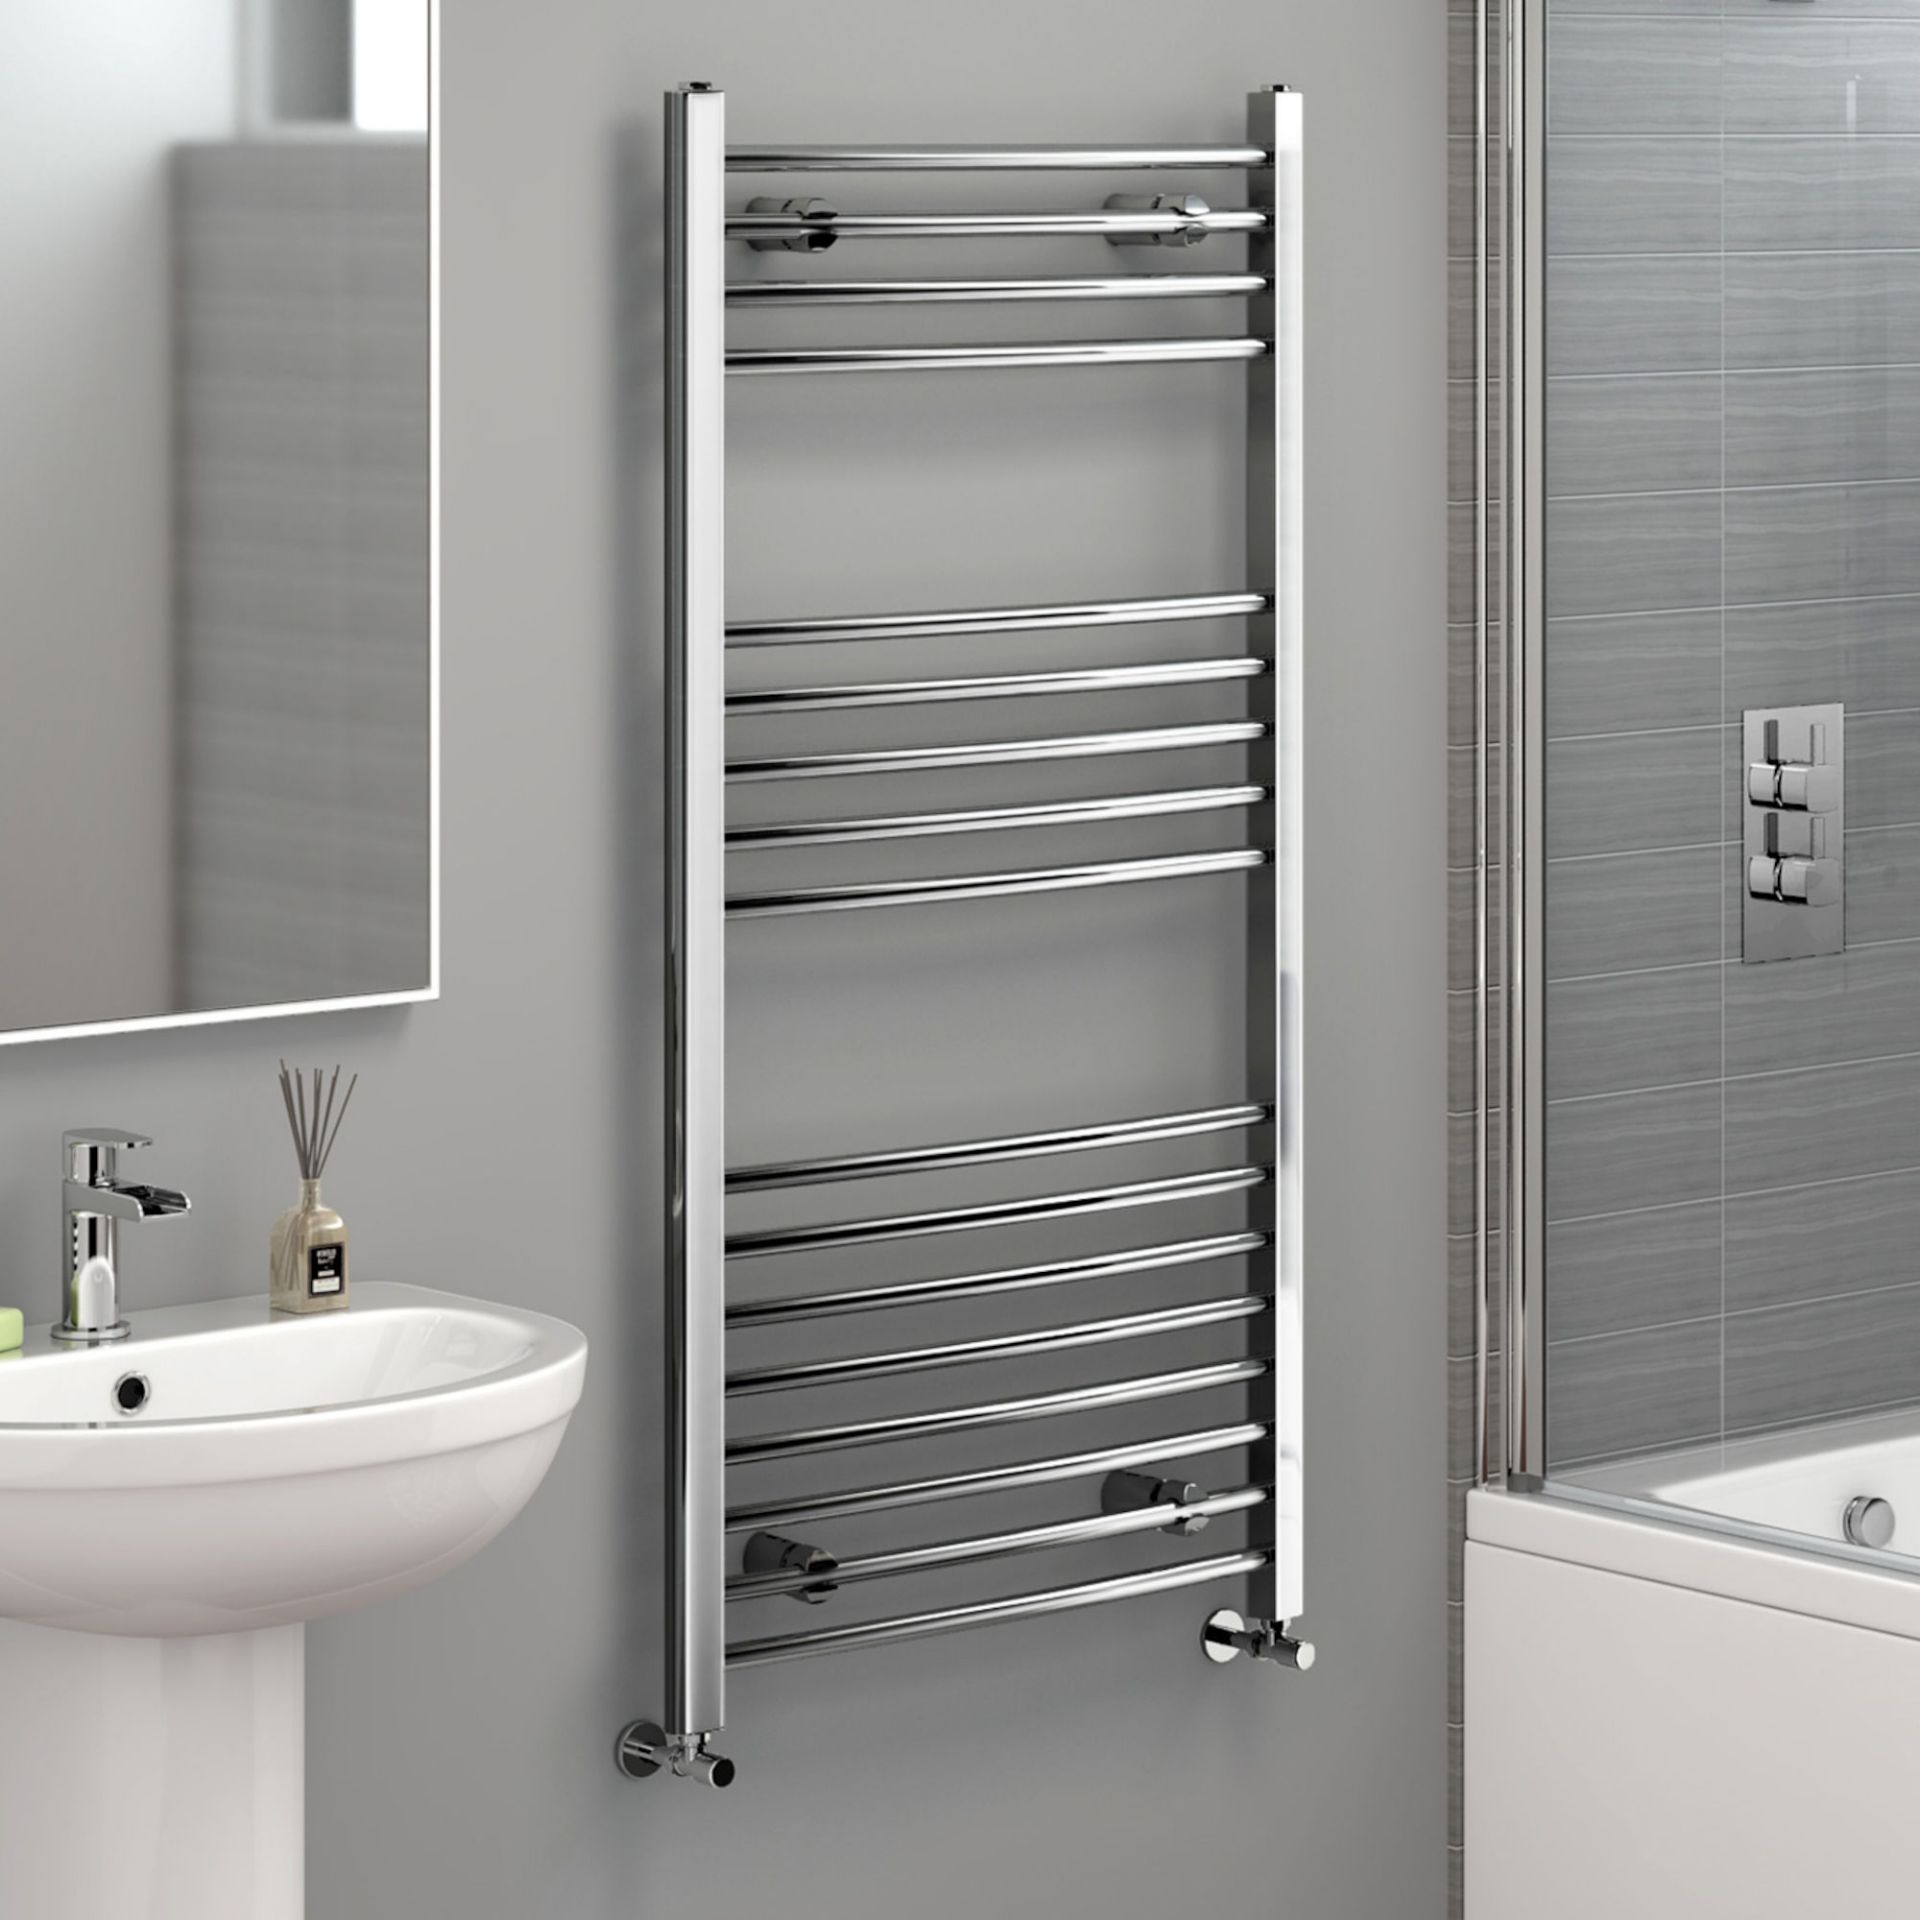 1200x600mm - 20mm Tubes - Chrome Curved Rail Ladder Towel Radiator. NC1200600. Made from chrome...